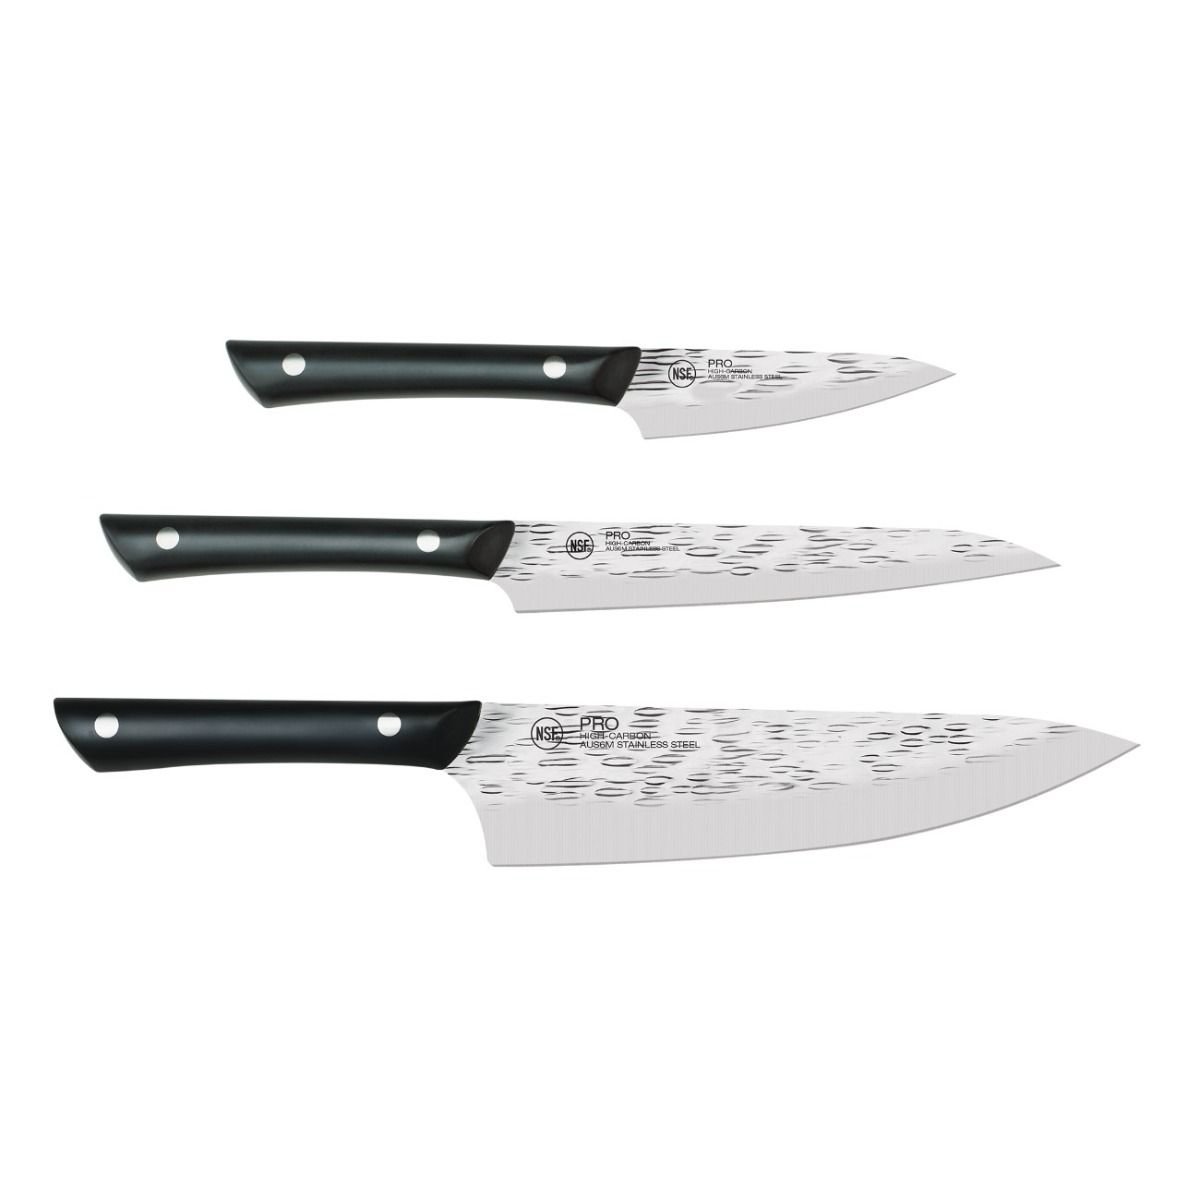 Brisket Knife Bundle with 8Chef's Knife, 12 Sharpening Hone and Case